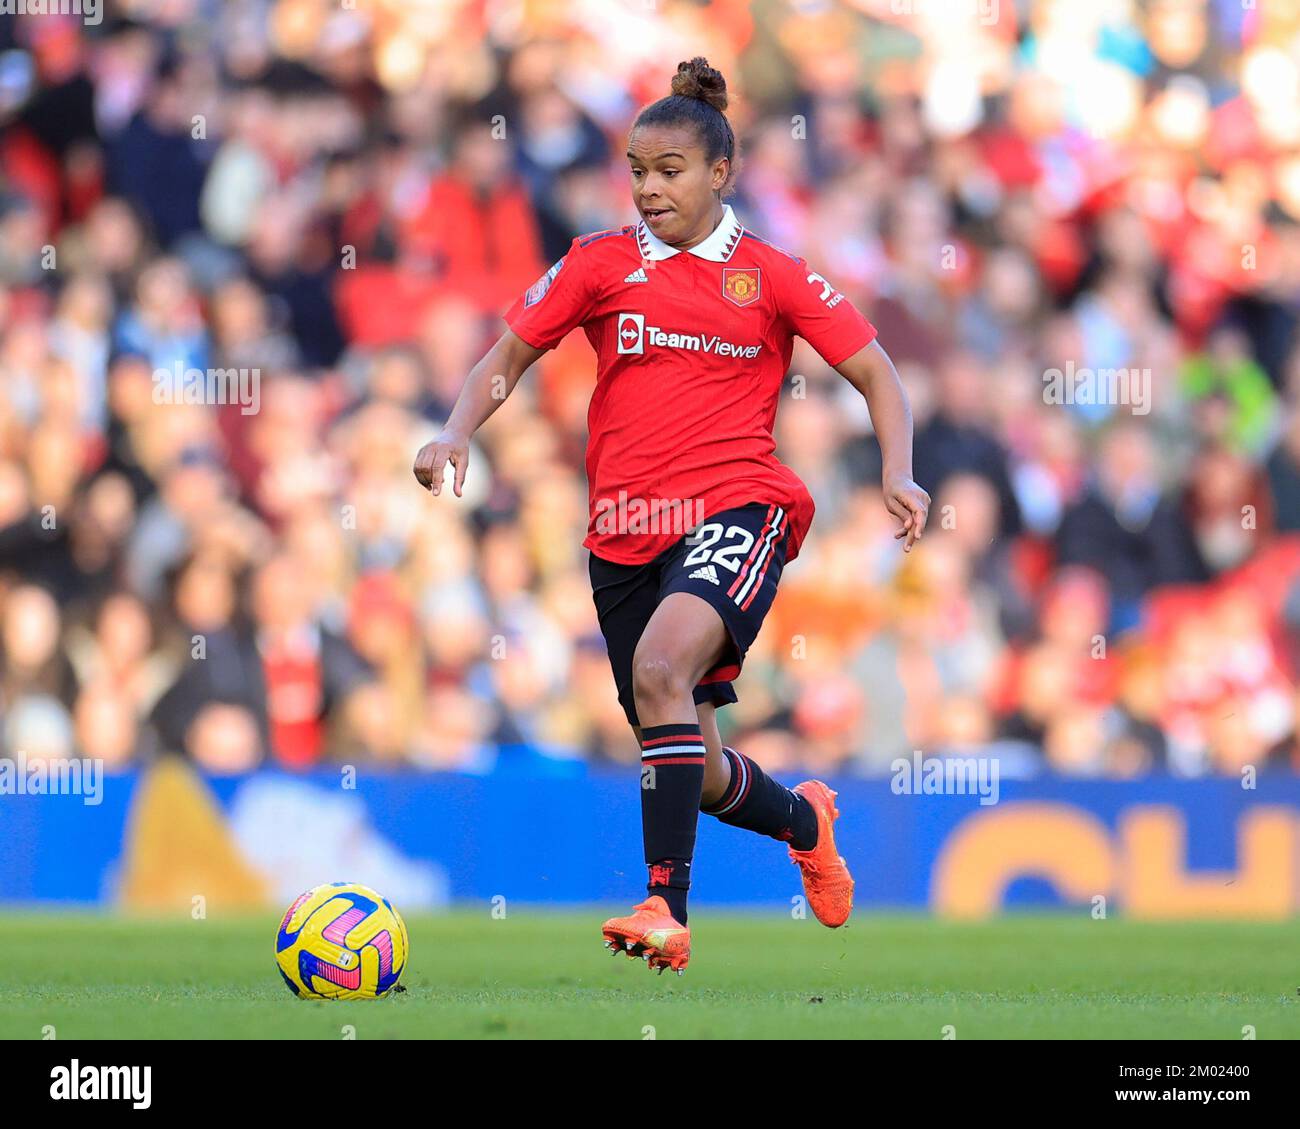 Nikita Parris #22 of Manchester United in action during The FA Women's Super League match Manchester United Women vs Aston Villa Women at Old Trafford, Manchester, United Kingdom, 3rd December 2022  (Photo by Conor Molloy/News Images) Stock Photo